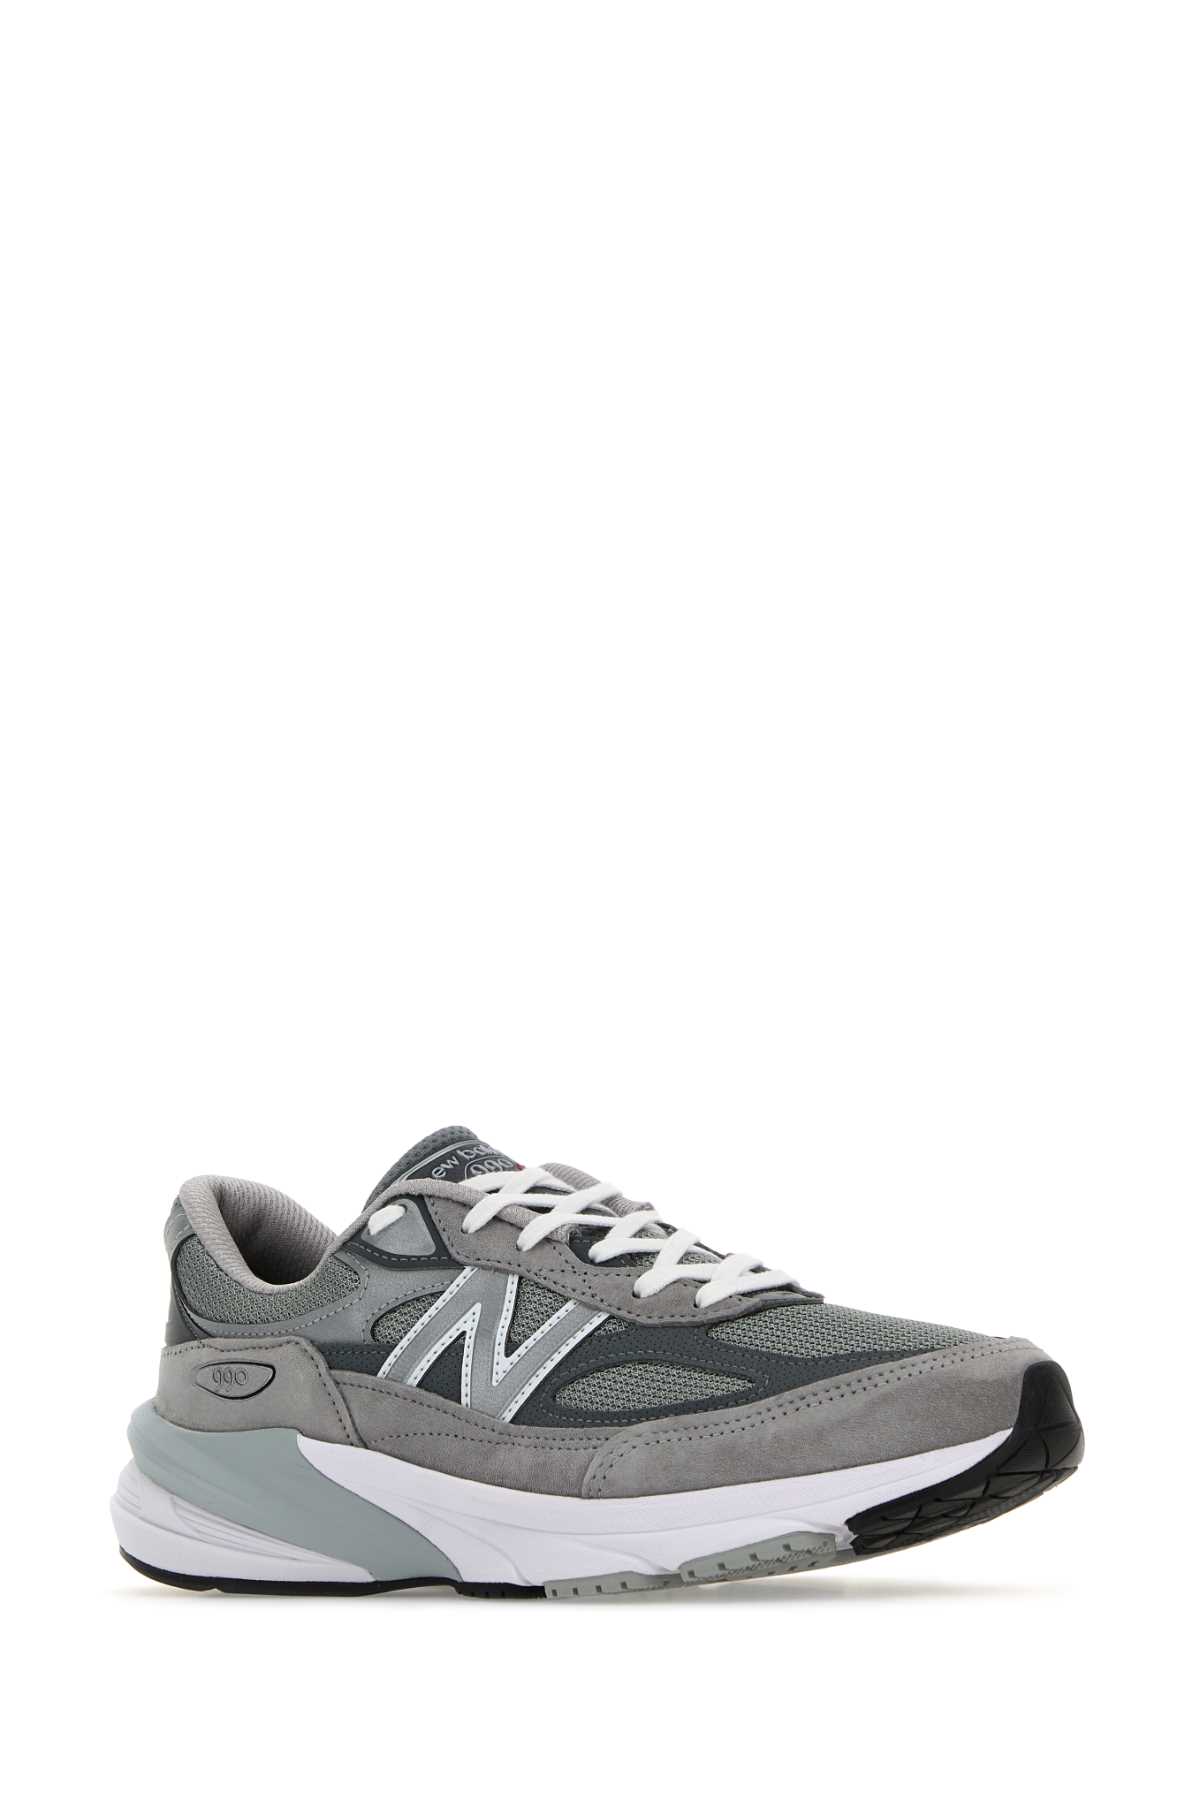 Shop New Balance Multicolor Fabric And Suede 990v6 Sneakers In Grey